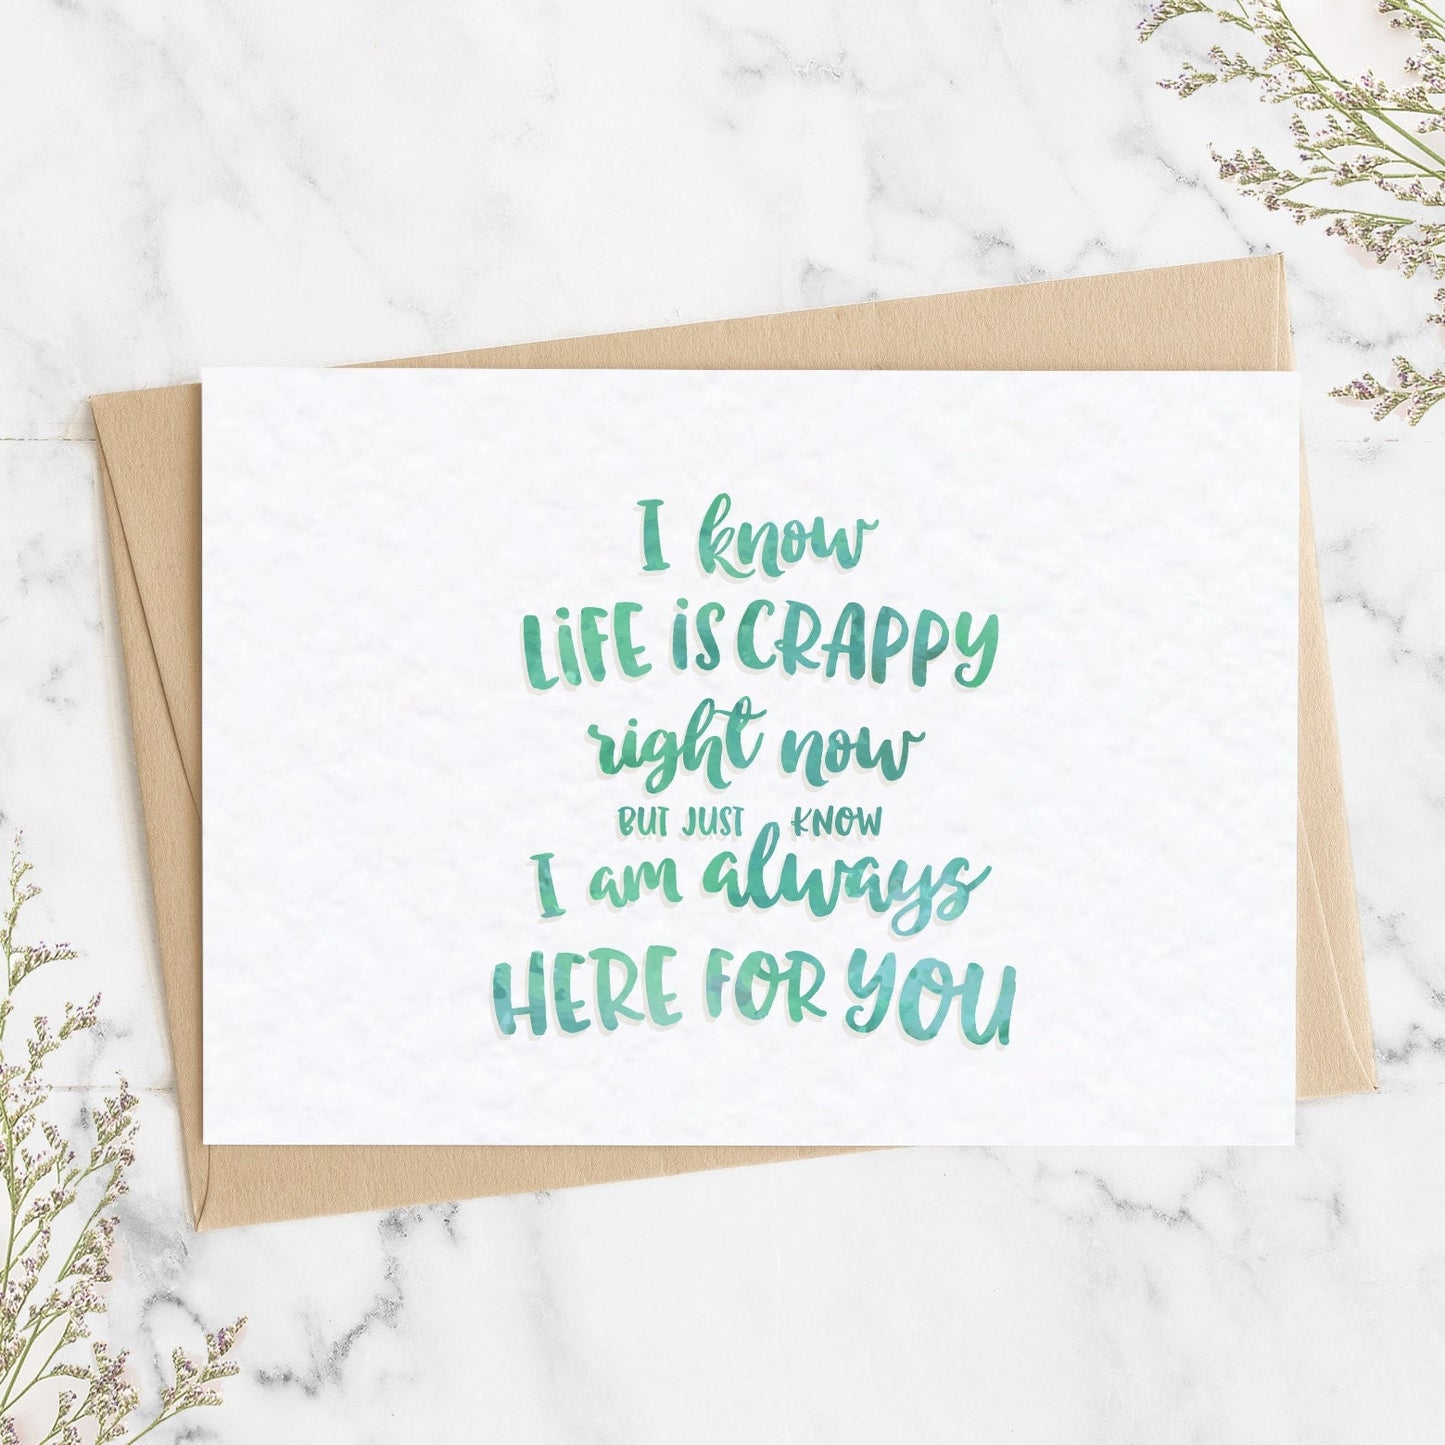 A thoughtful thinking of you card with a watercolour textured message saying "I KNOW LIFE IS CRAPPY RIGHT NOW BUT JUST KNOW I AM ALWAYS HERE FOR YOU".